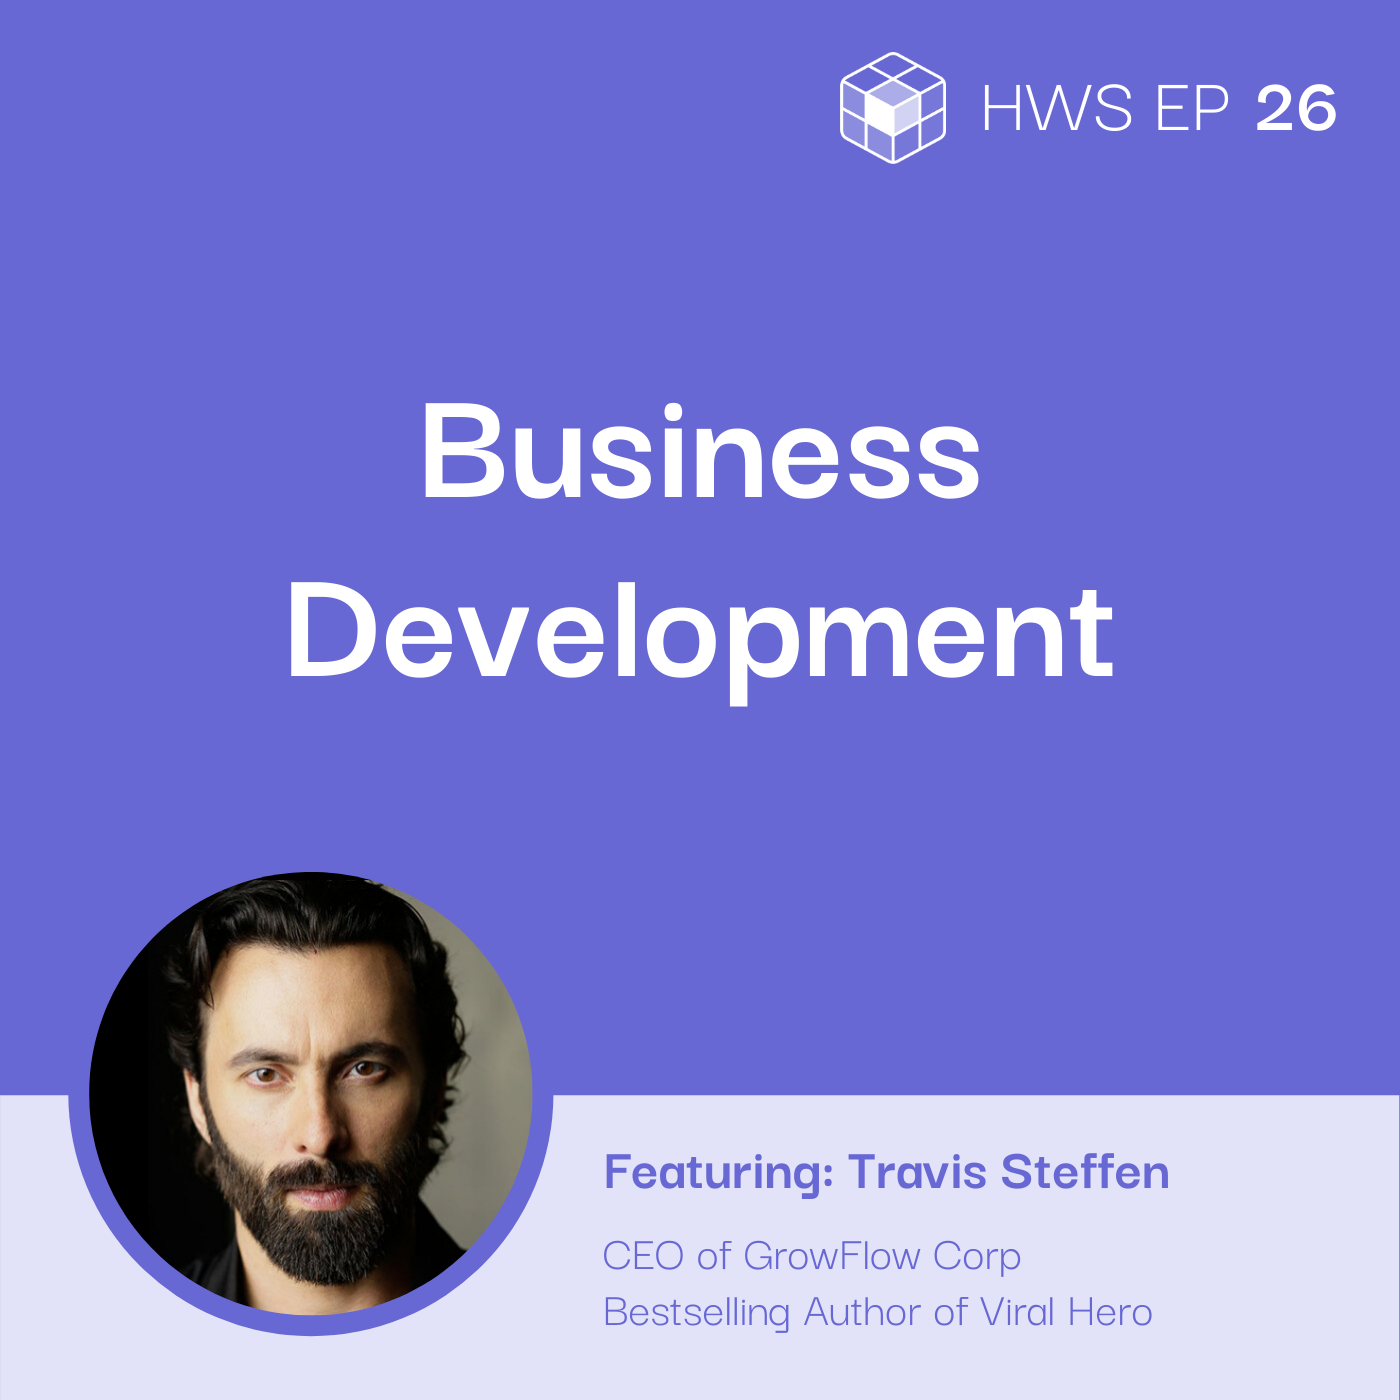 Travis Steffen from GrowFlow talks about building and running a business in a highly regulated industry of cannabis